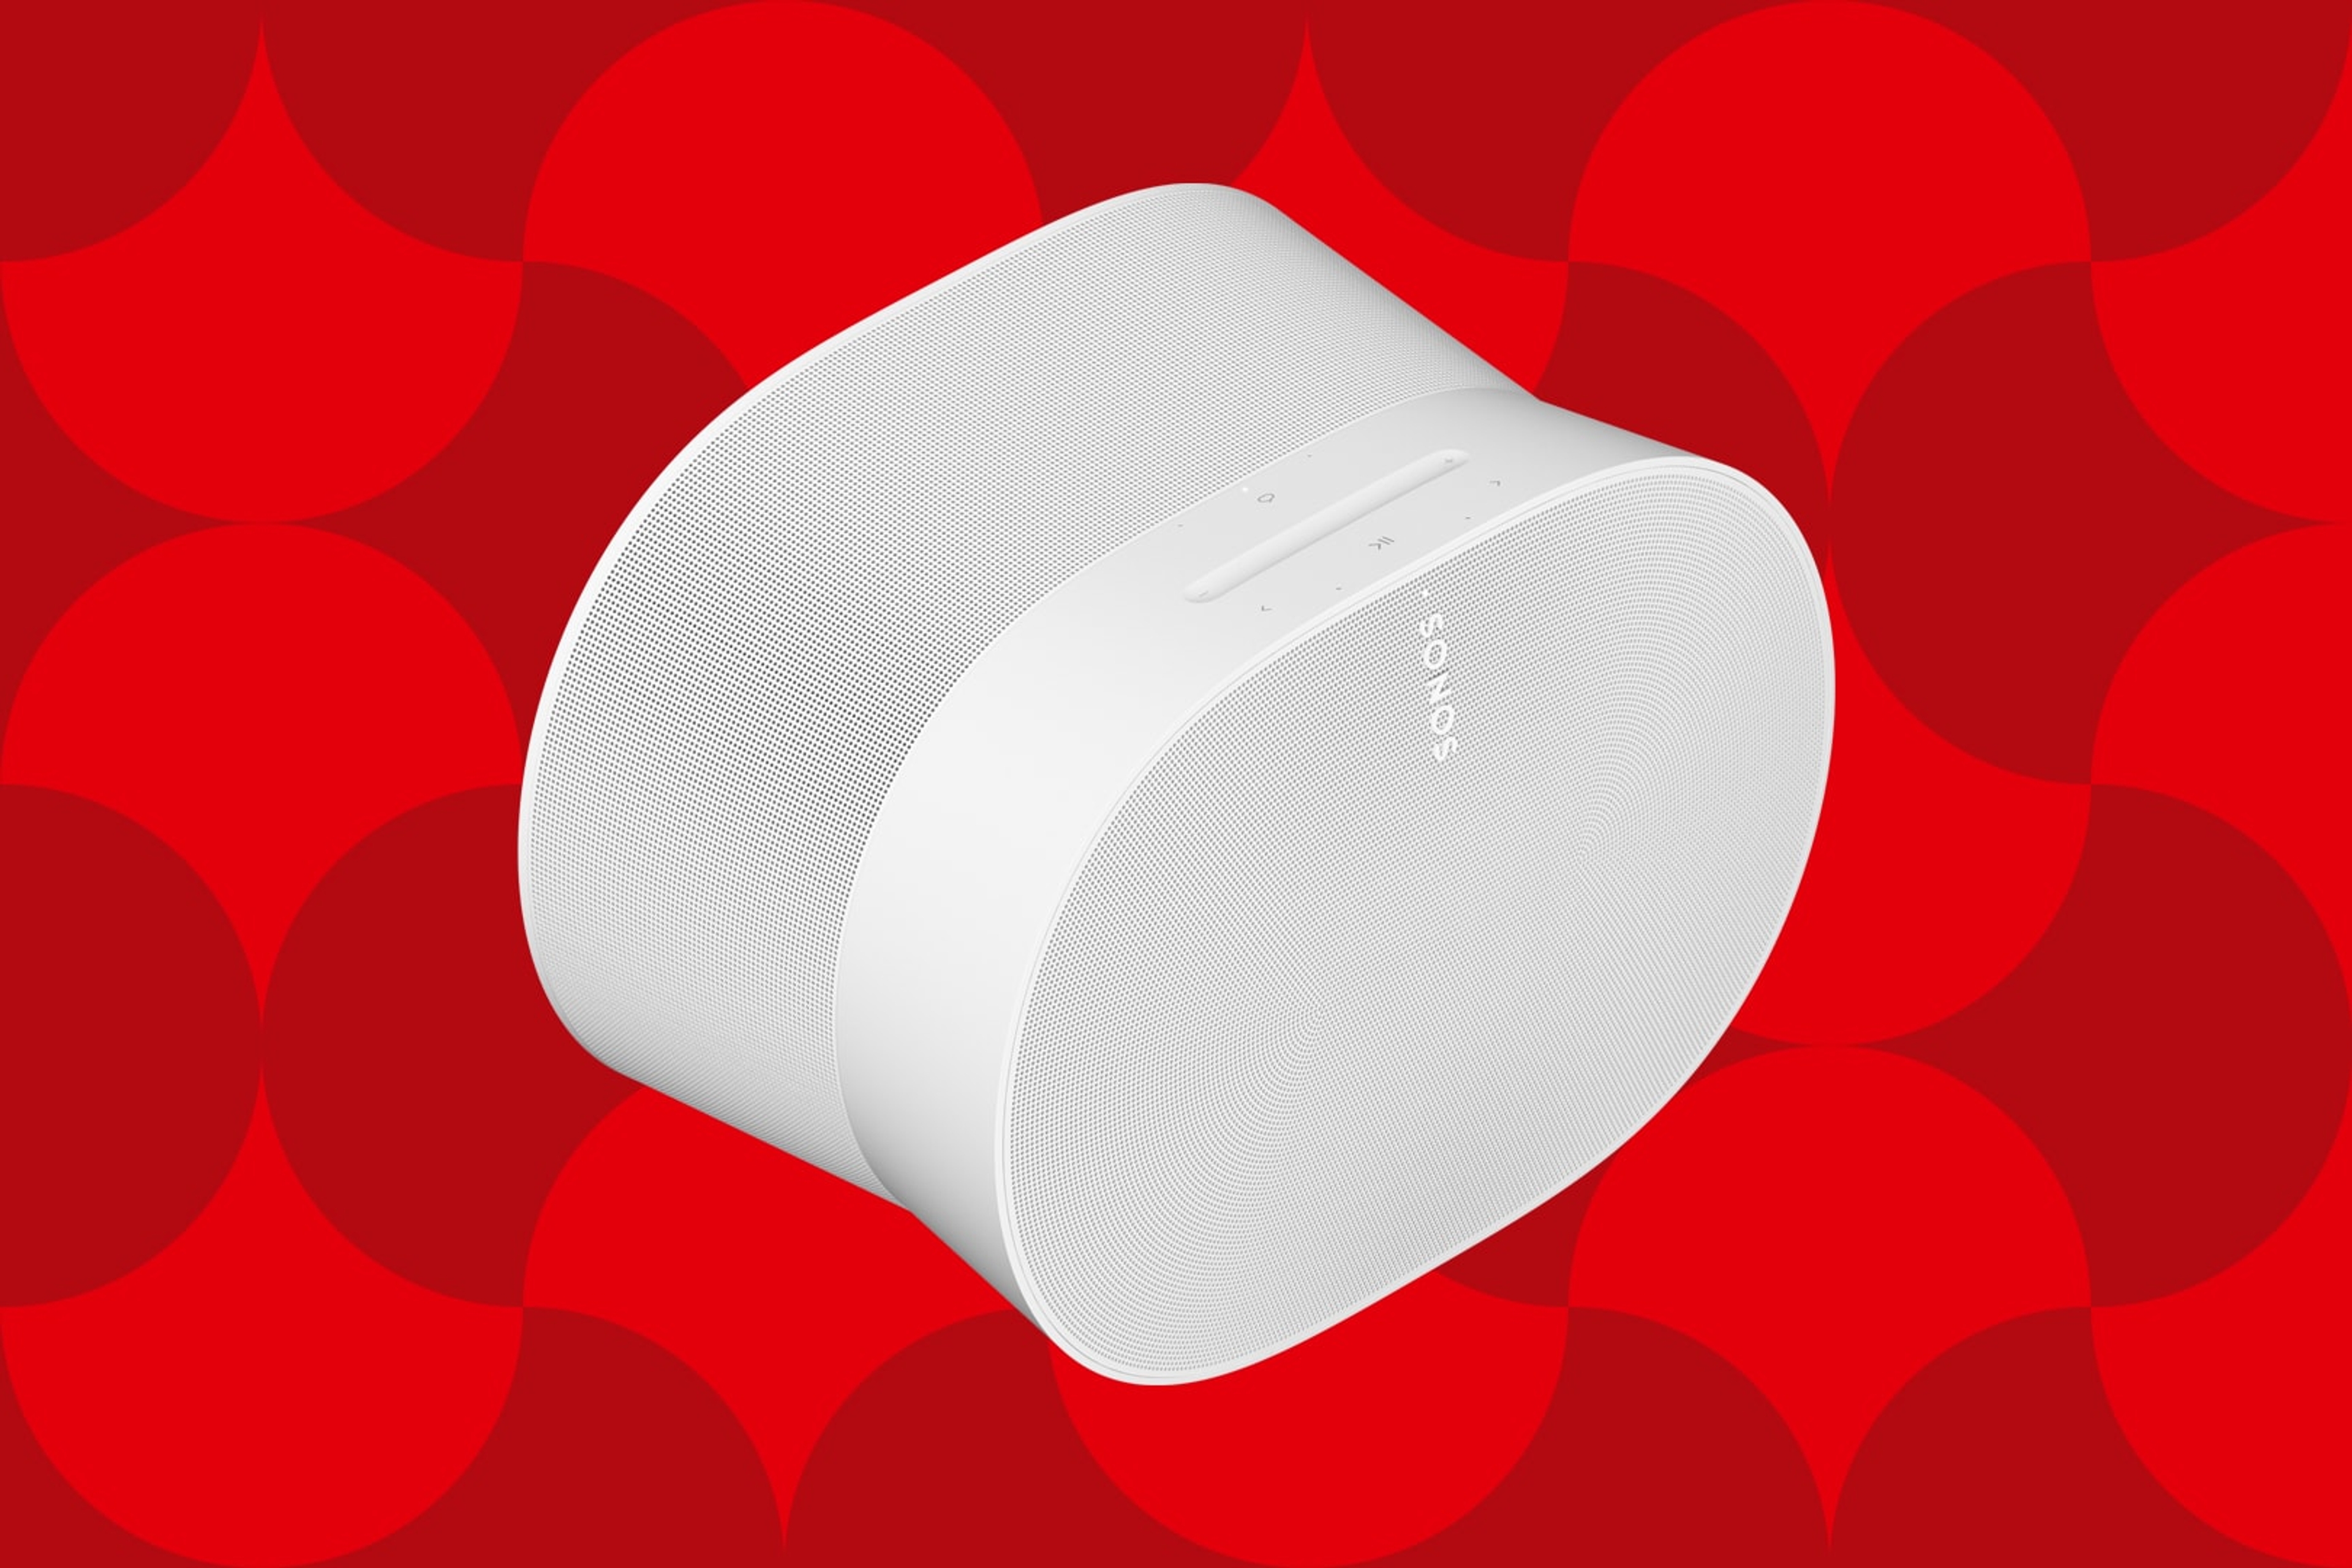 Image of a white Sonos Era 300 speaker on a red graphic holiday background